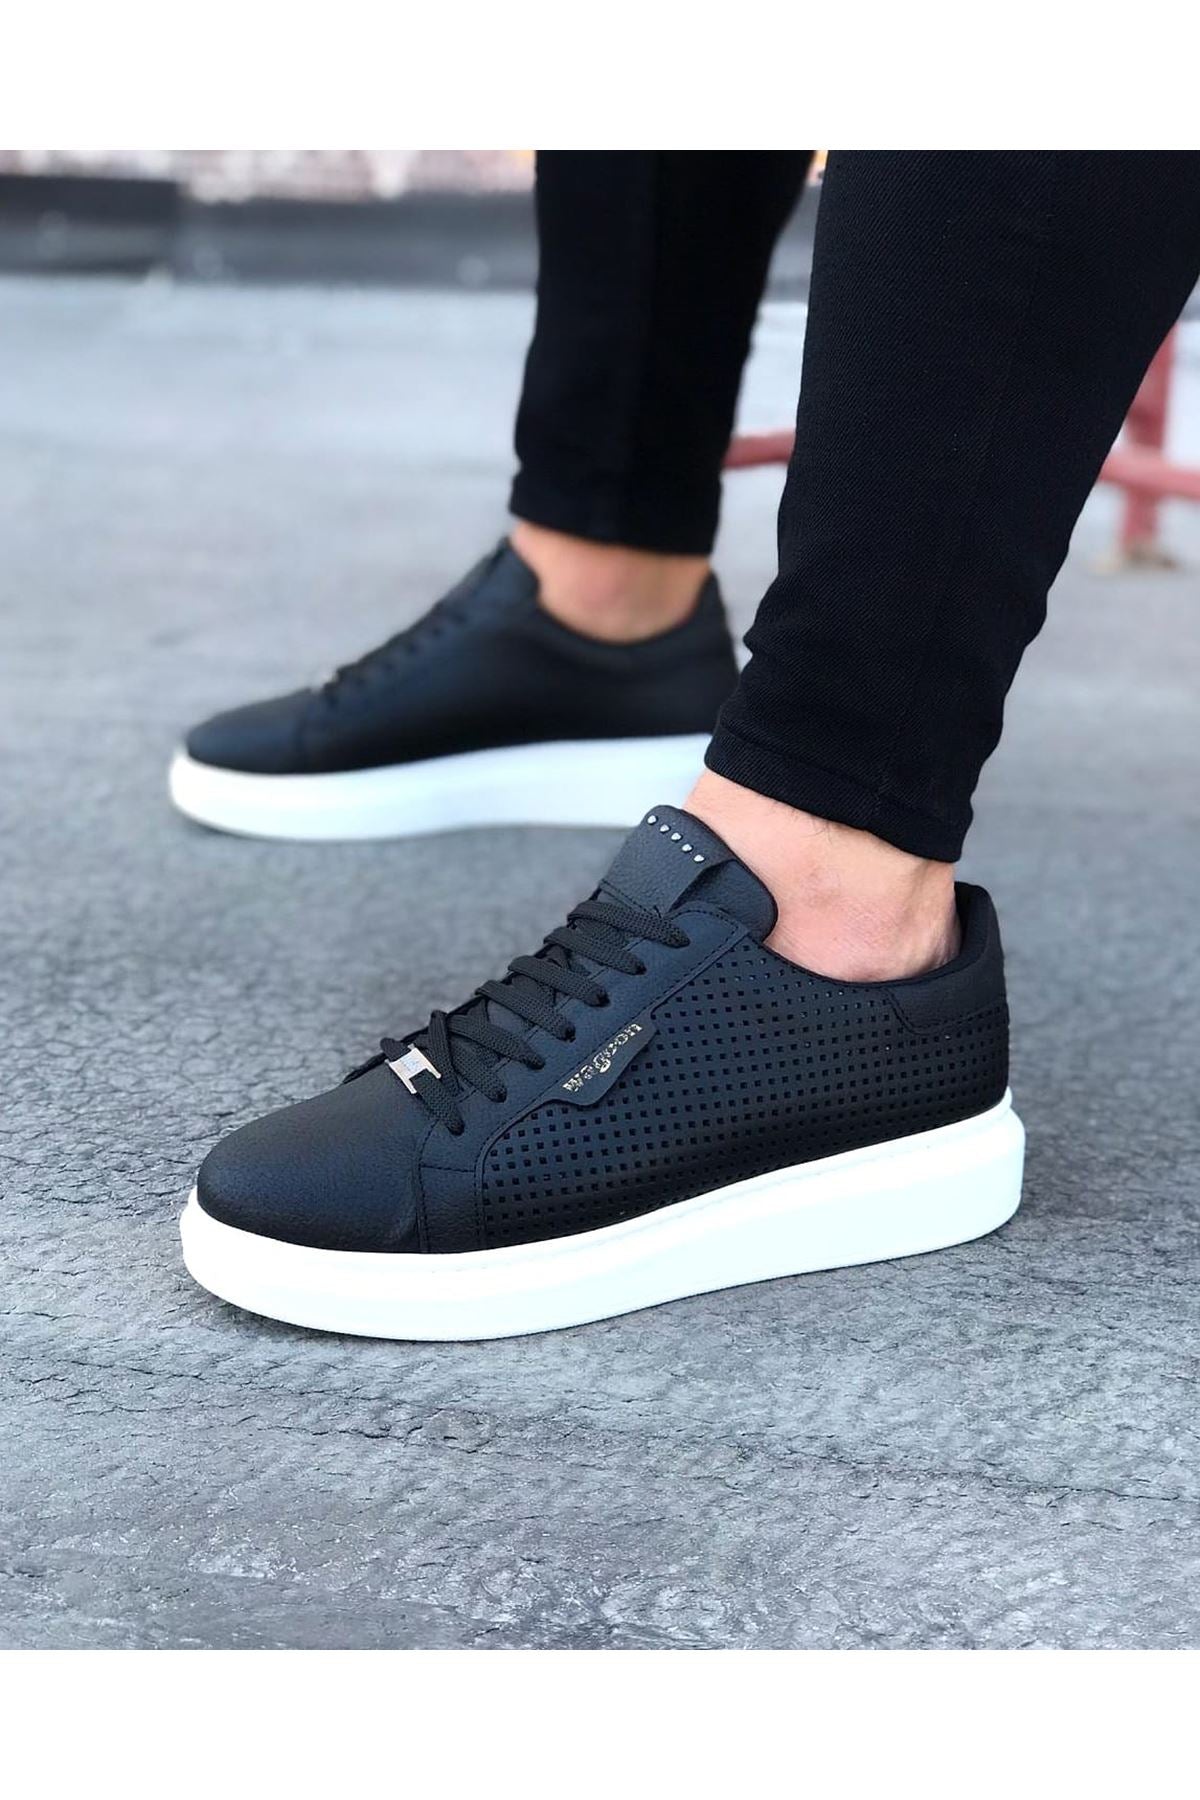 WG01 Black Perforated Men's High-Sole Shoes sneakers - STREETMODE ™